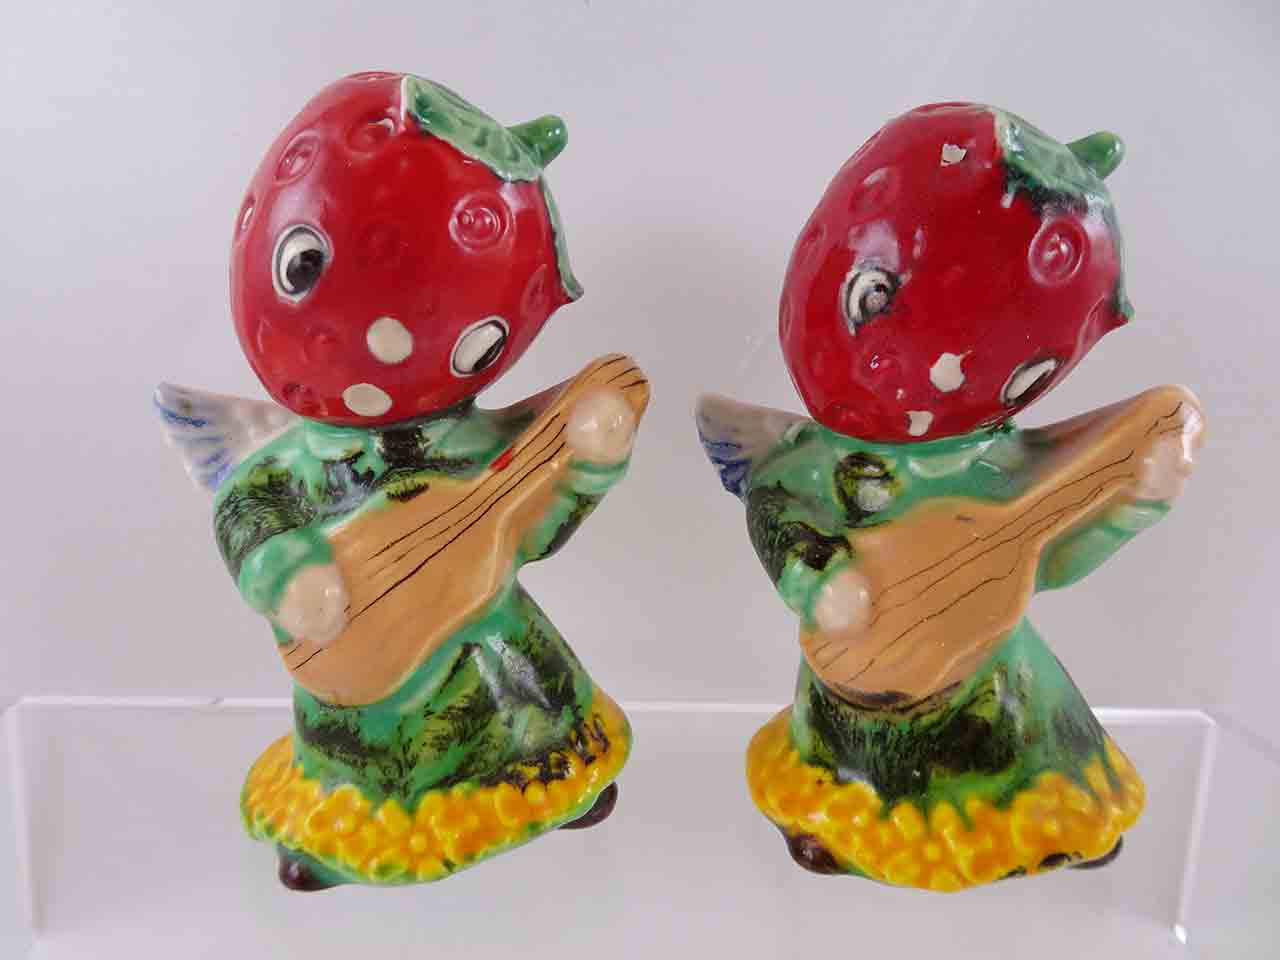 Heavenly Music series - anthropomorphic strawberries playing guitar salt and pepper shakers